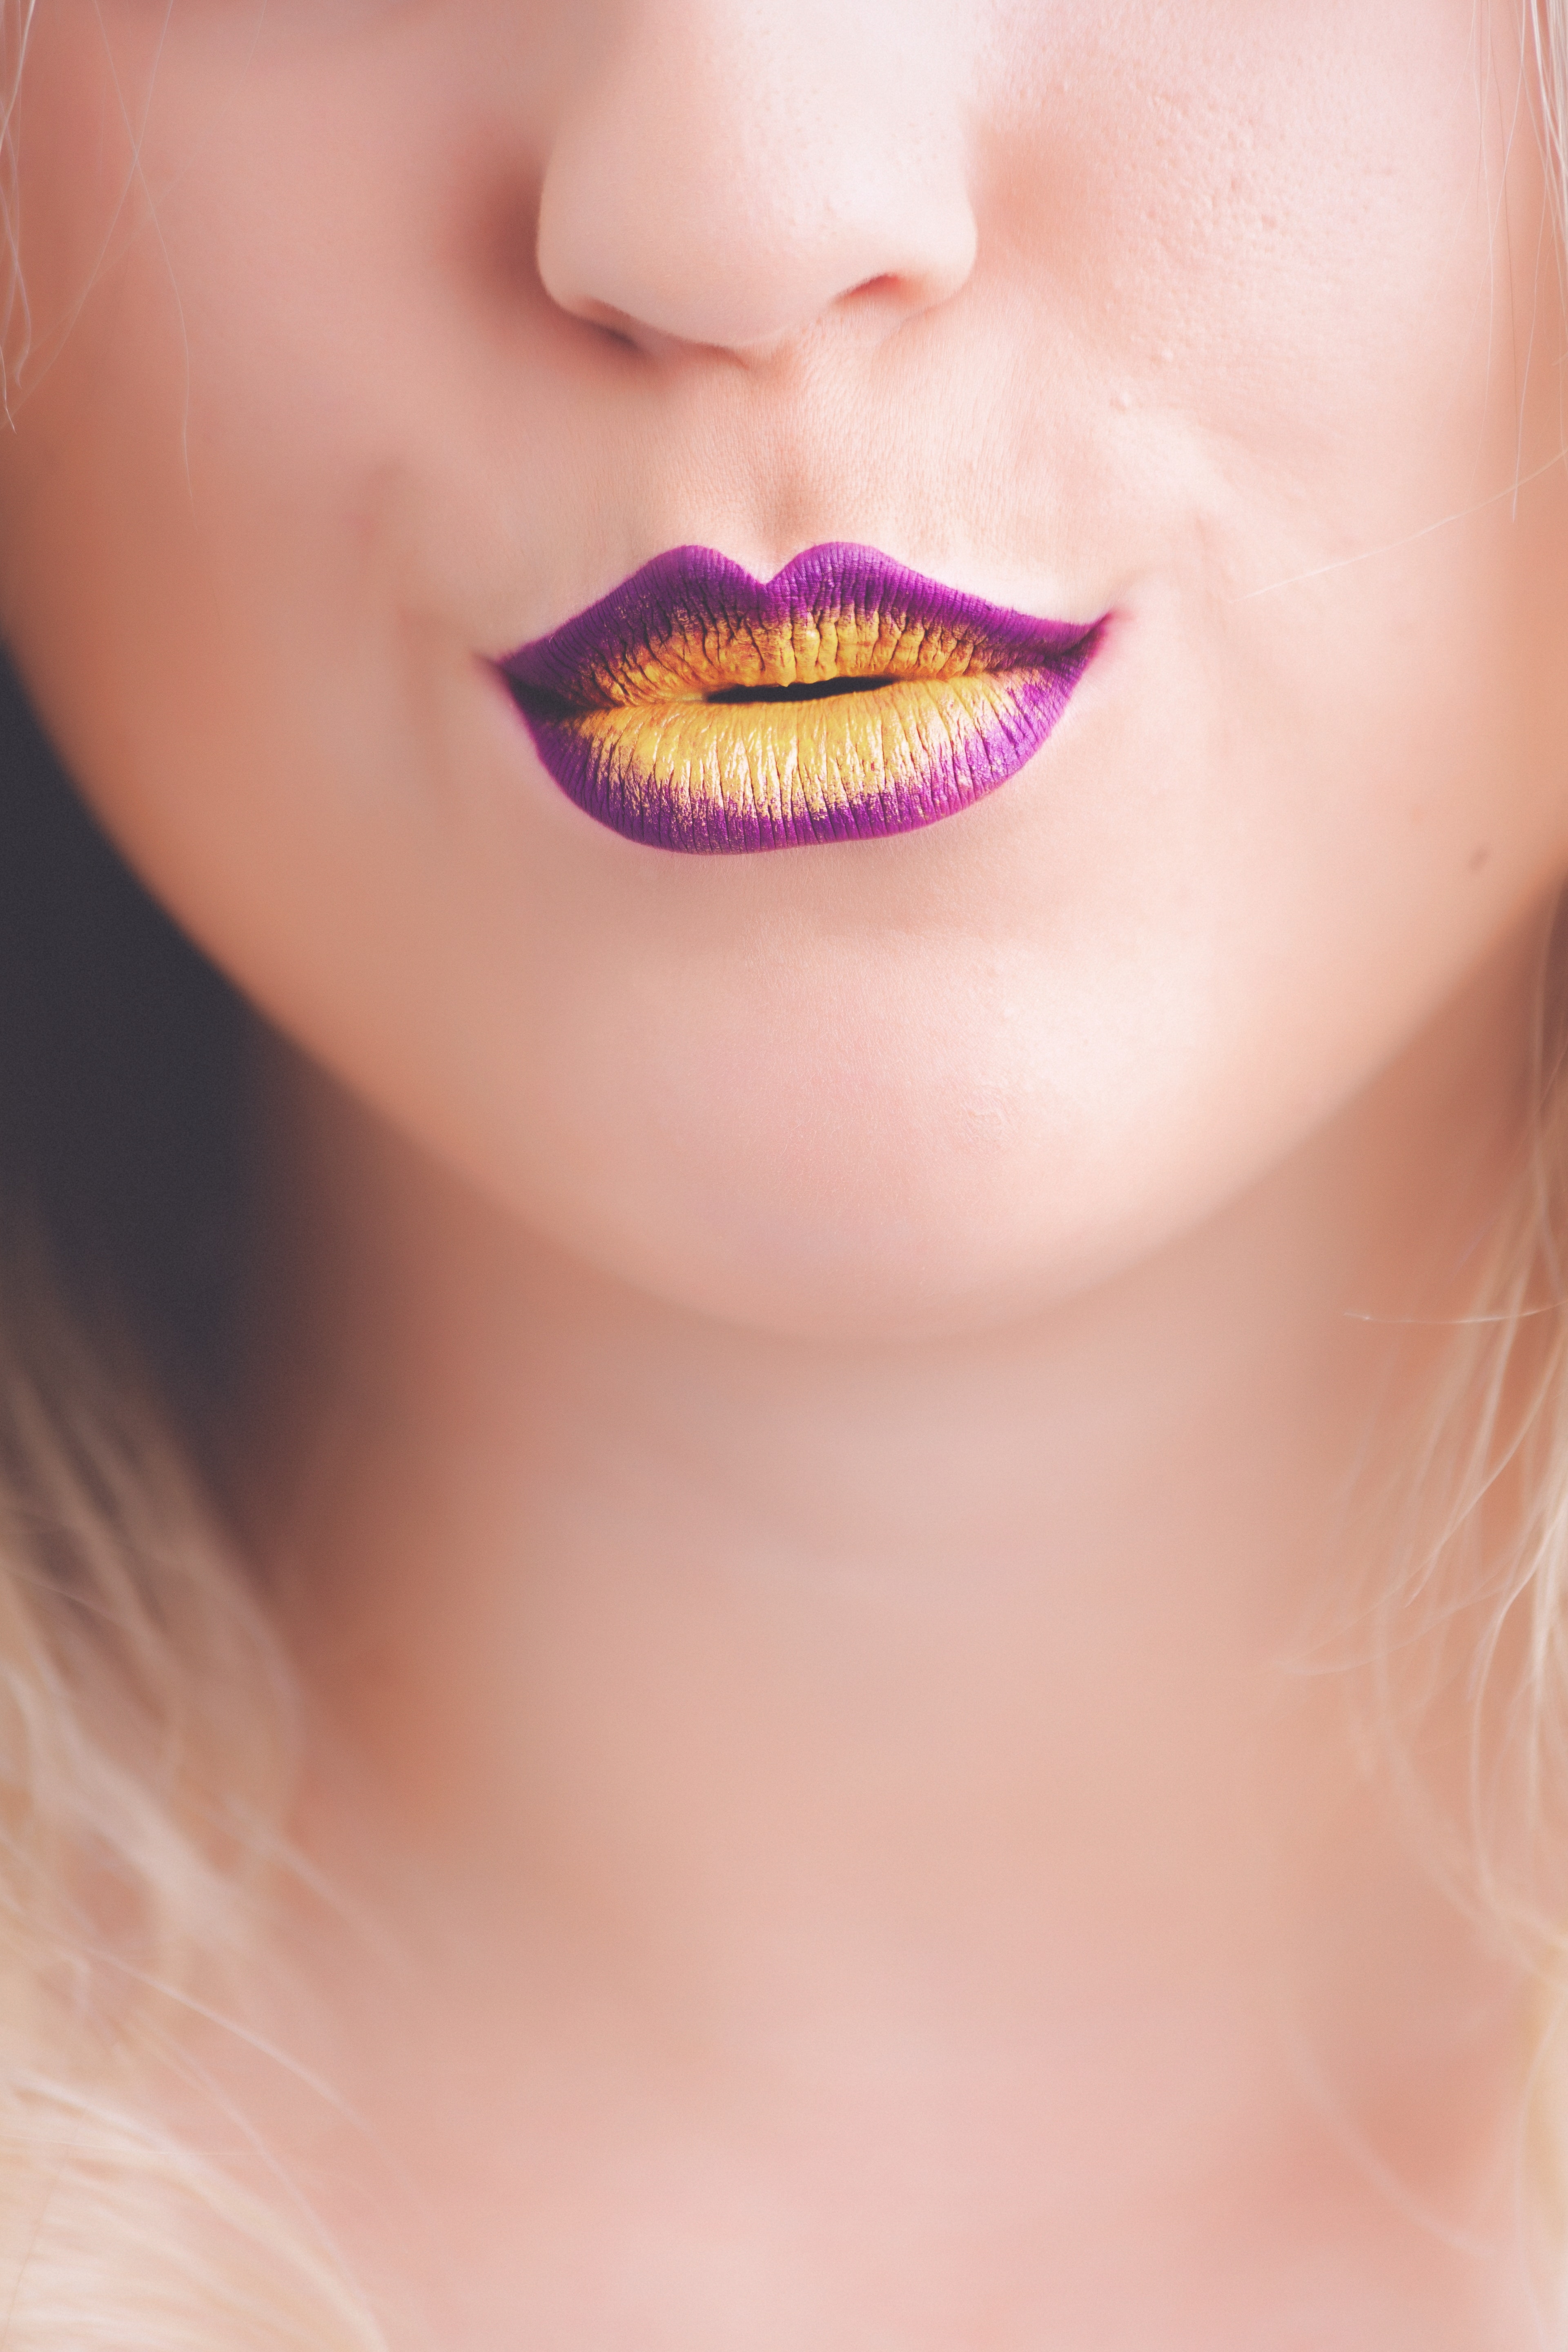 Woman with purple and yellow lipstick photo